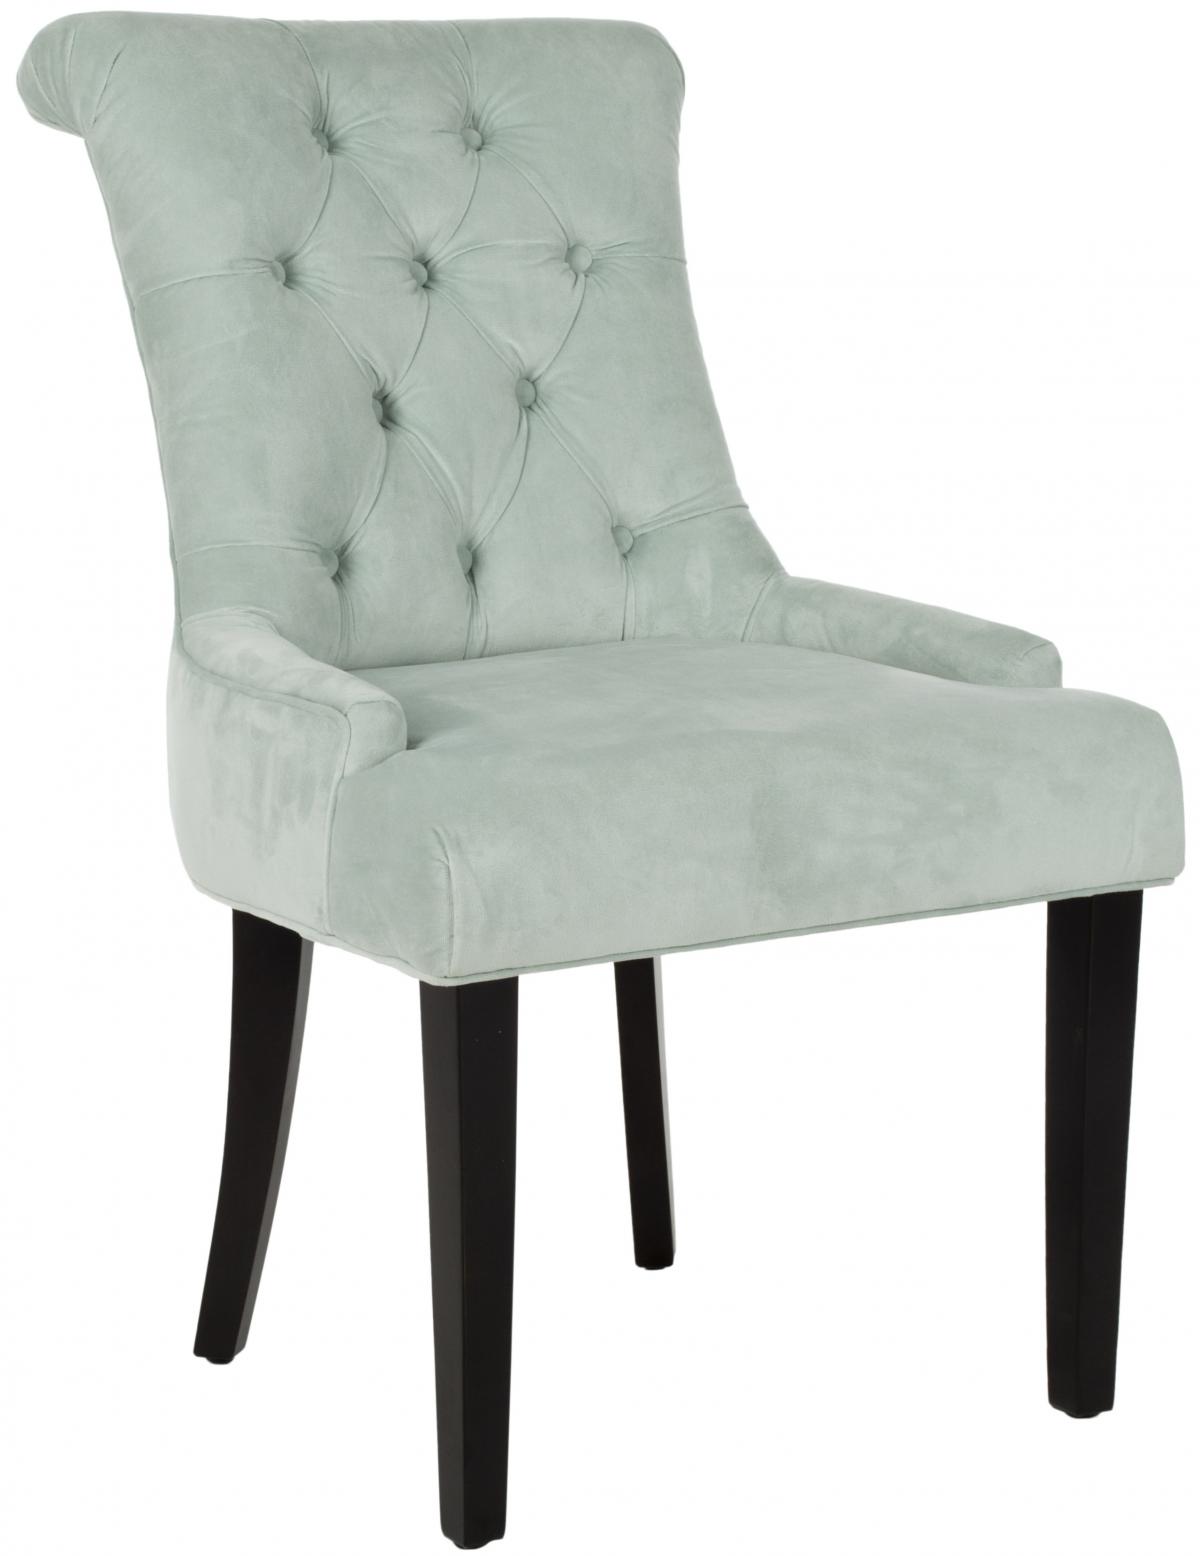 Safavieh - MCR4712A BOWIE SIDE CHAIR - LIGHT BLUE (SET OF TWO)